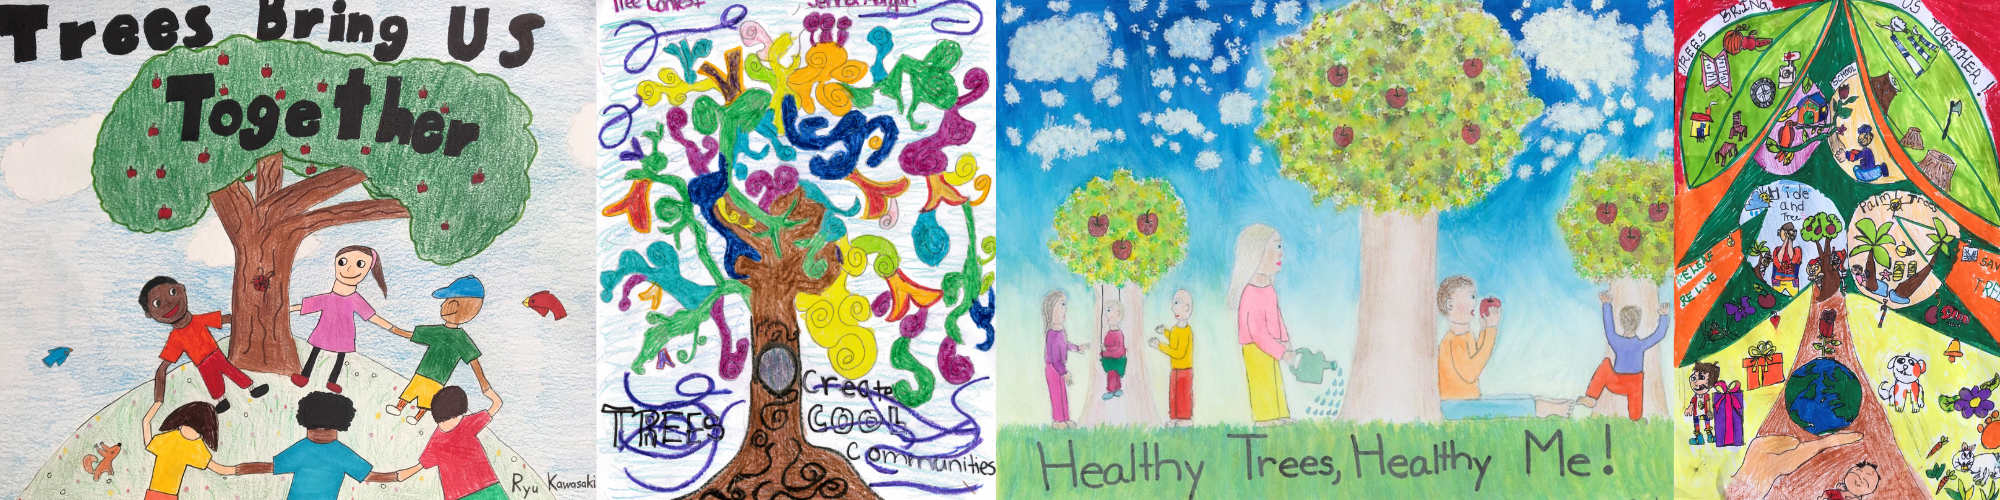 Children's artwork depicting trees, people caring for trees, and enjoying the benefits of trees